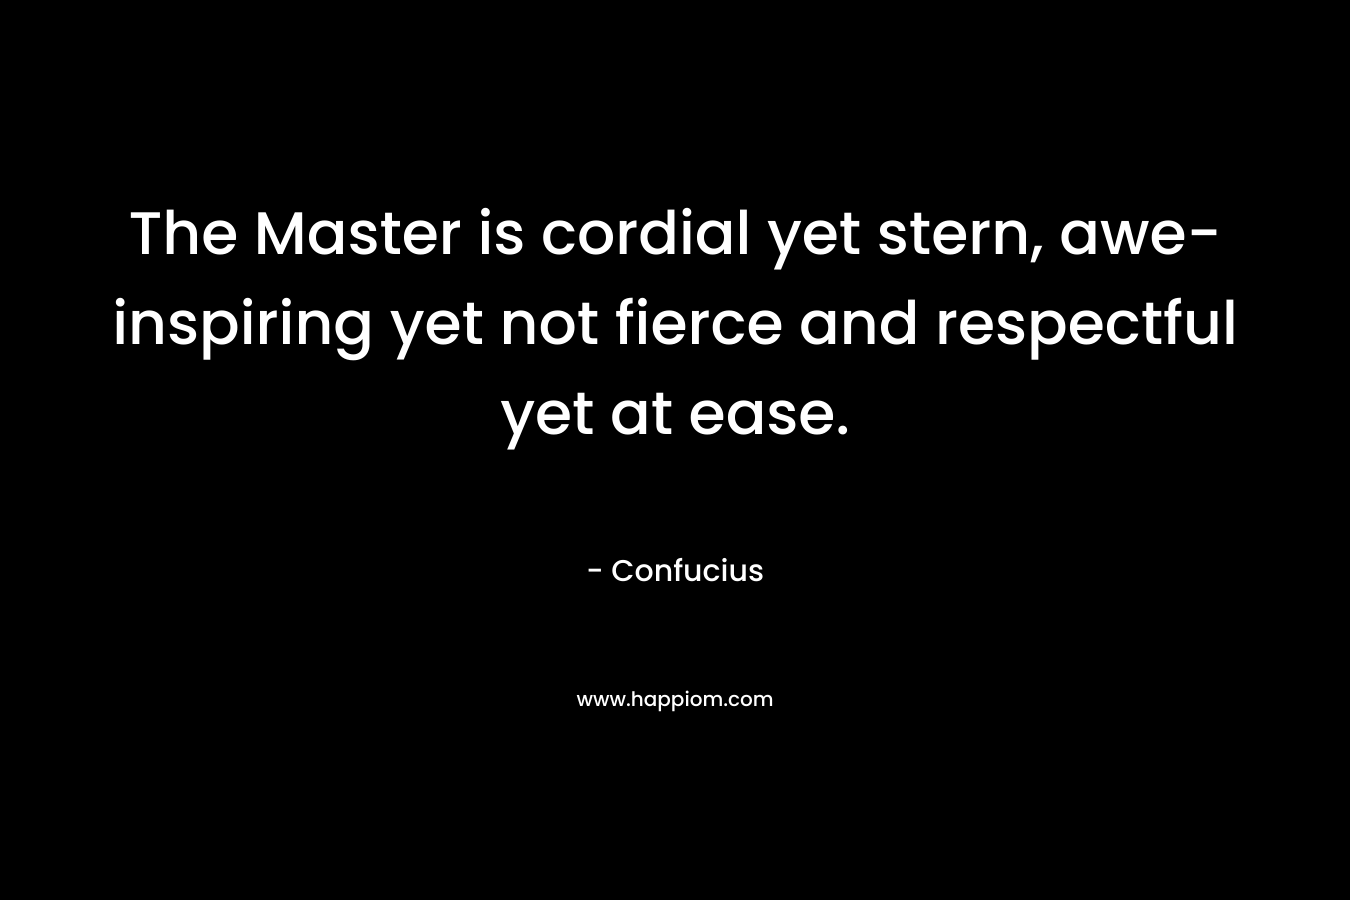 The Master is cordial yet stern, awe-inspiring yet not fierce and respectful yet at ease.